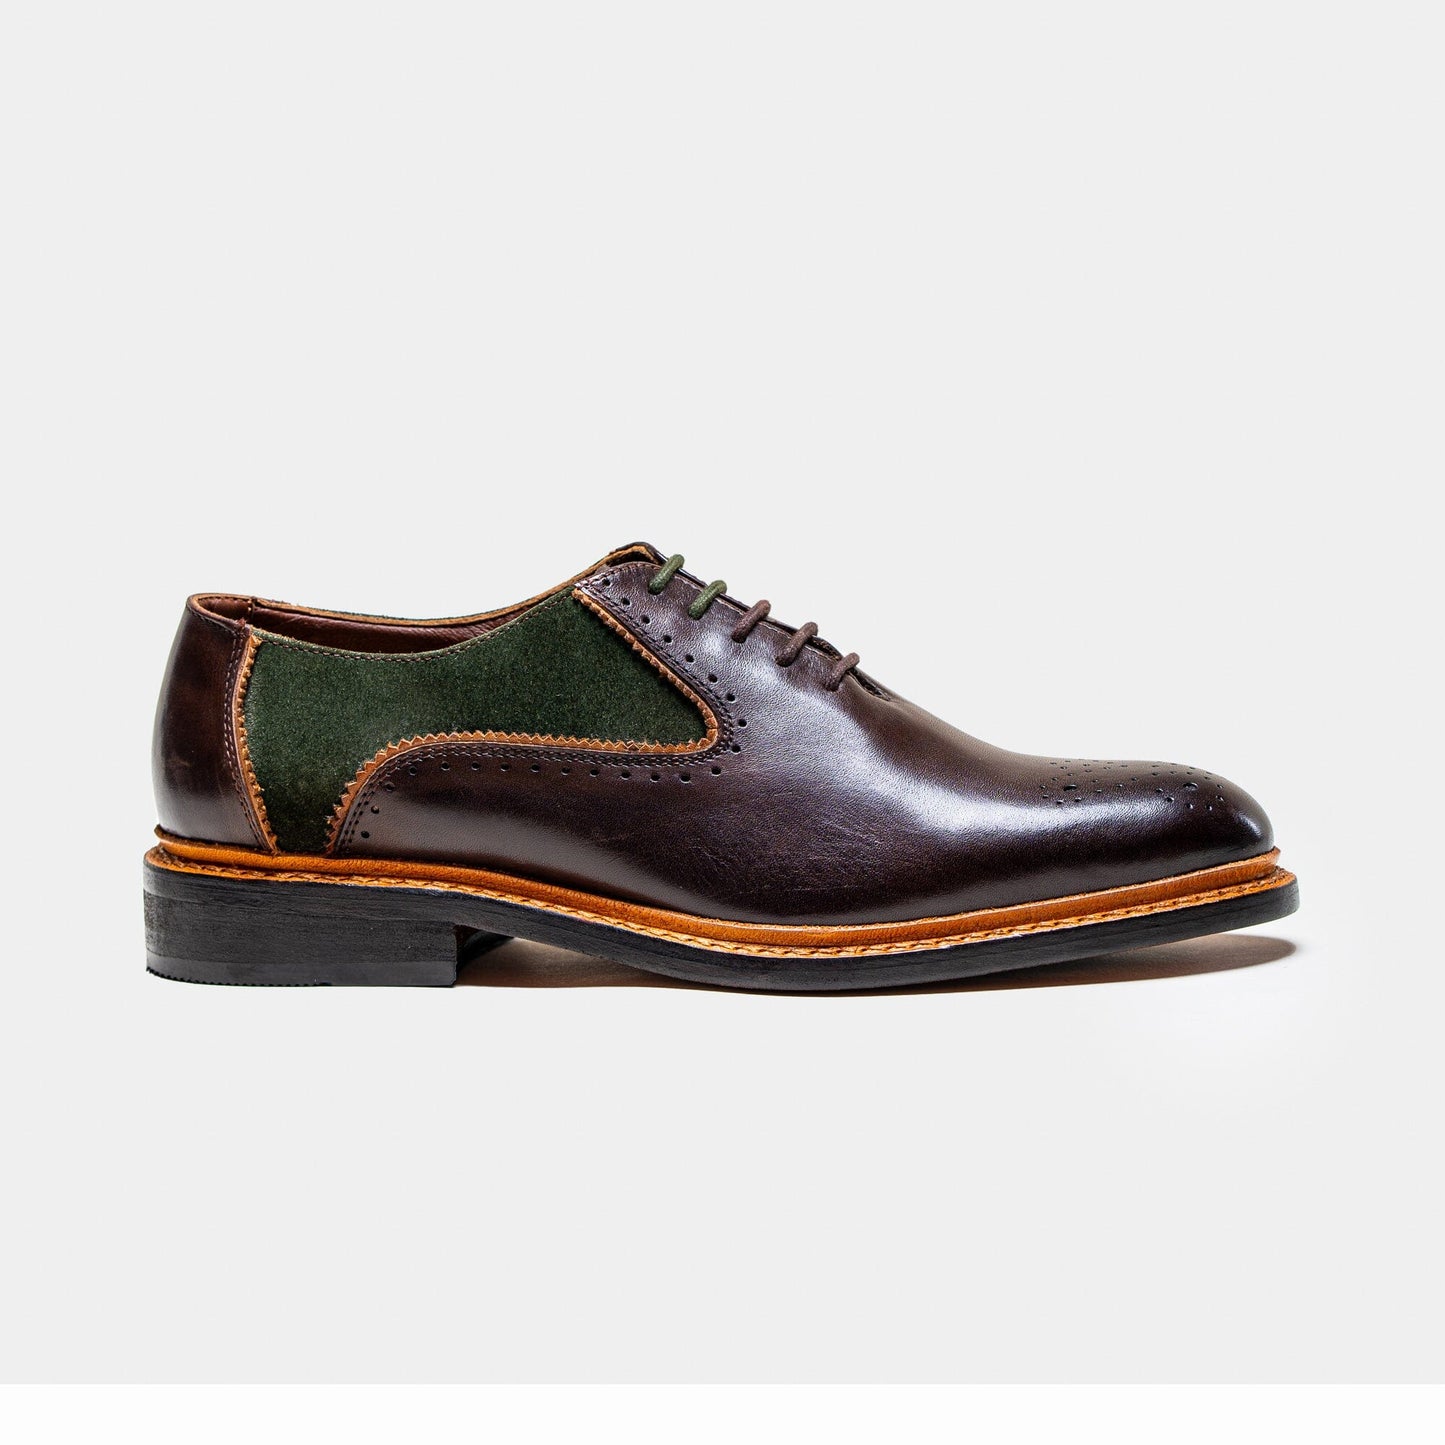 Brentwood Brown & Olive Shoes - Shoes - 7 - THREADPEPPER